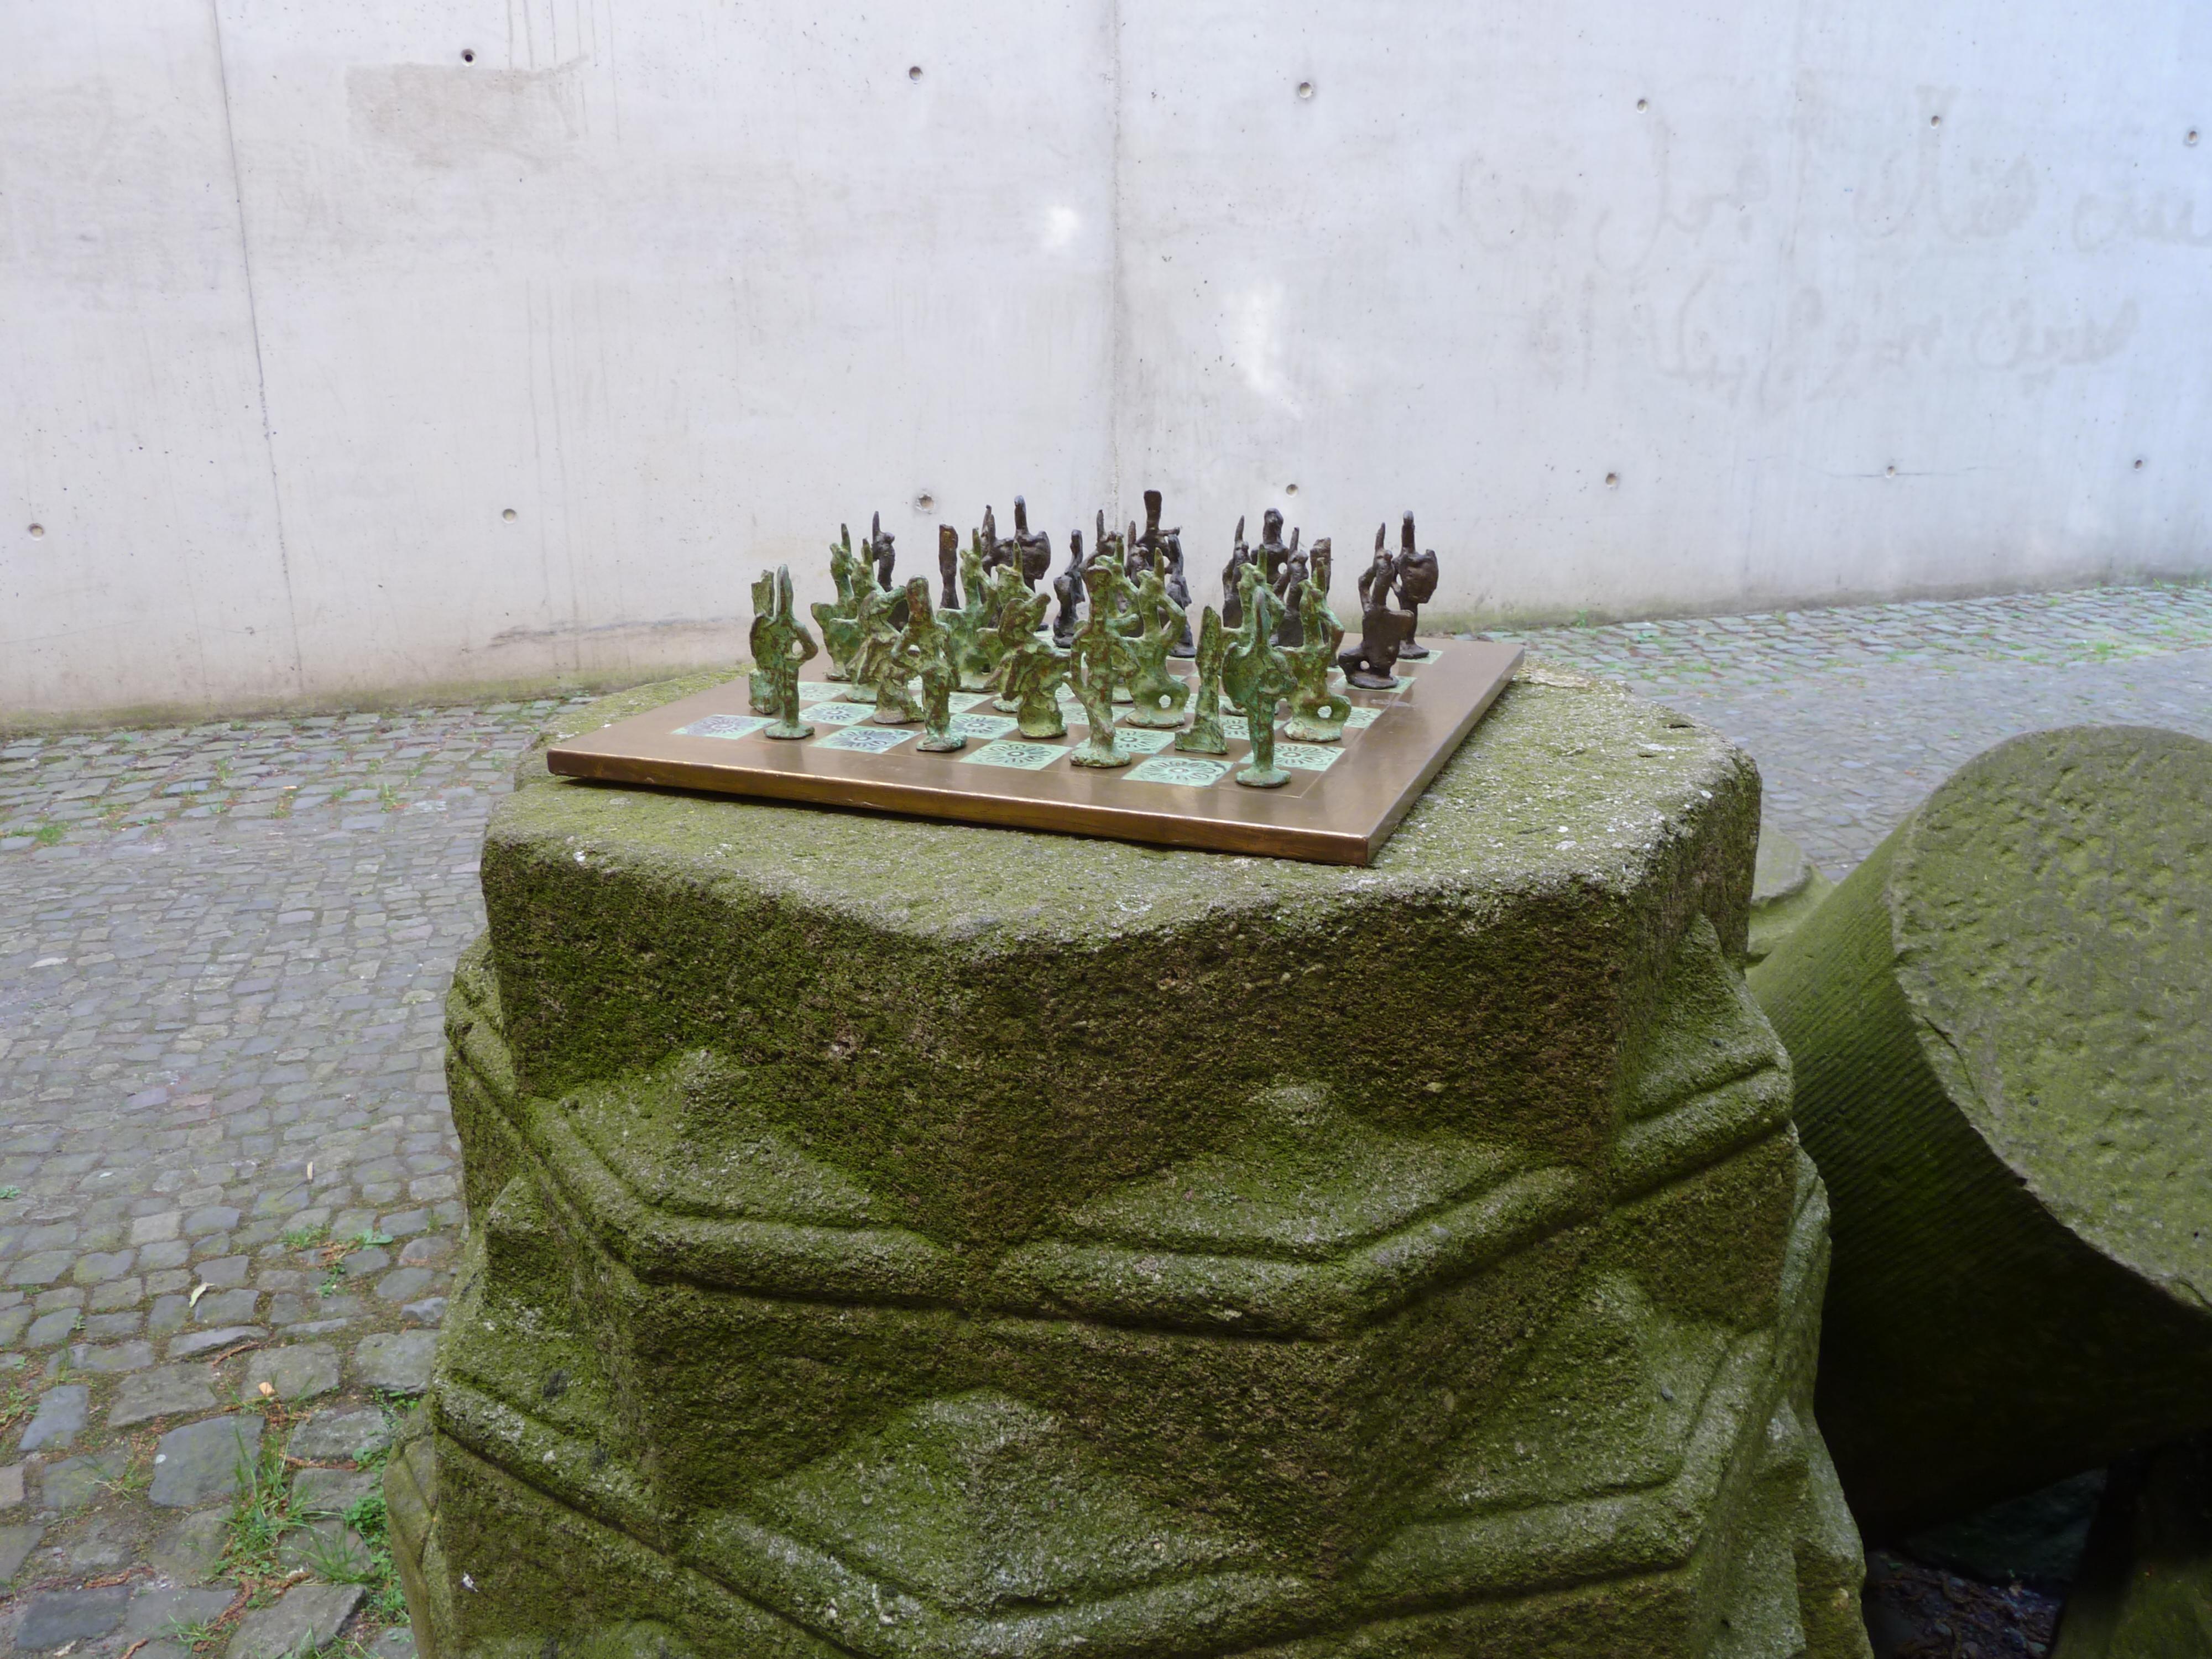 Stunning chess set with cast bronze player pieces and hammered and patinated brass chessboard.